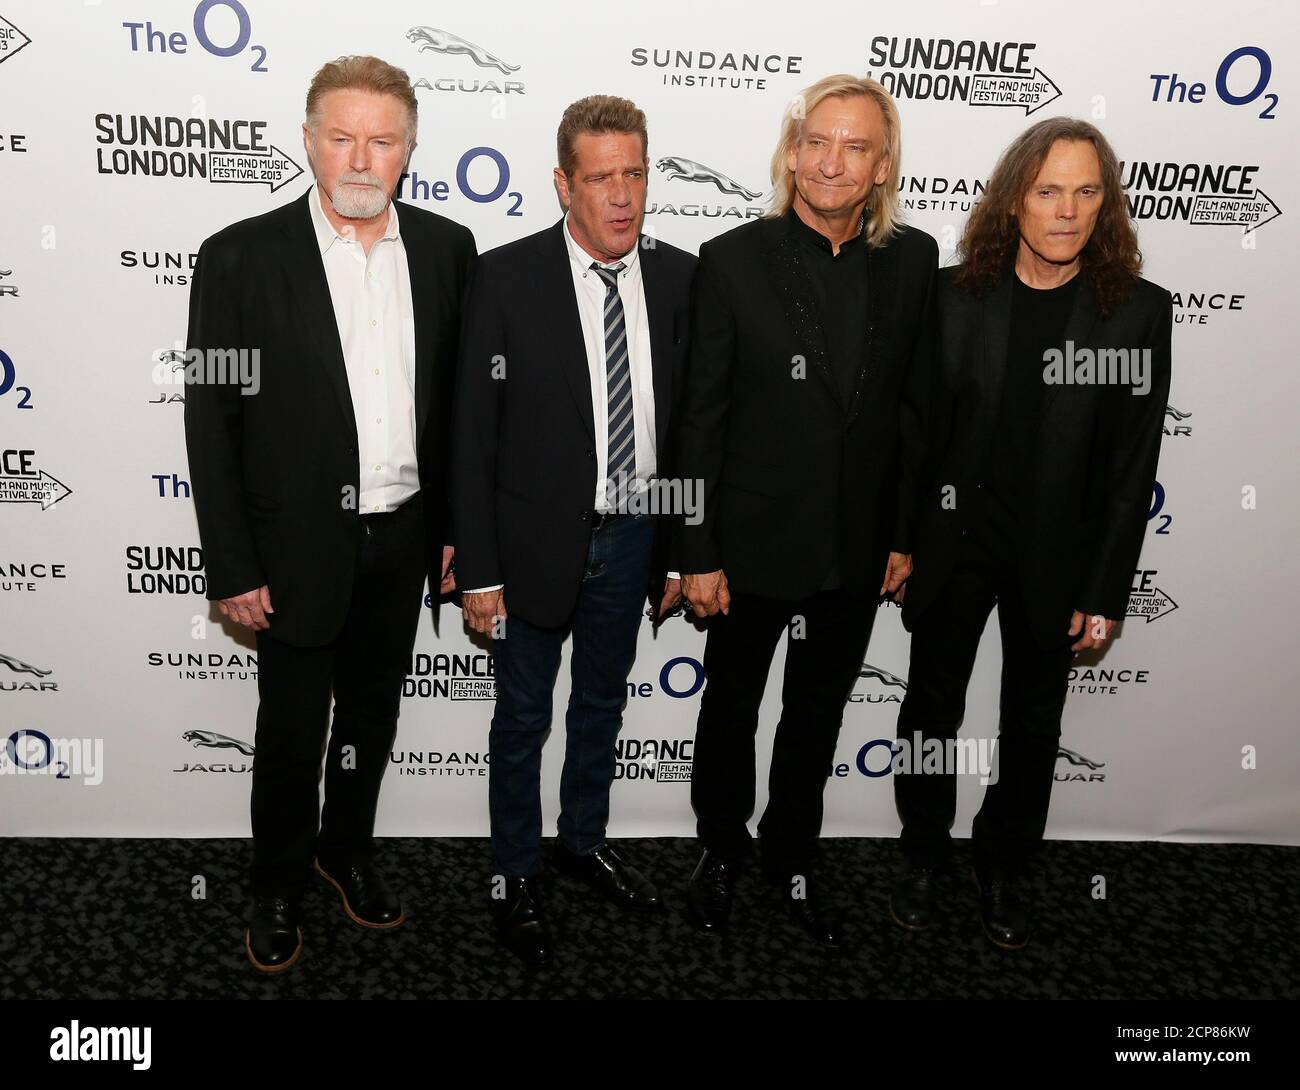 Ombord farligt uddøde Members of the band The Eagles (L - R) Don Henley, Glenn Frey, Joe Walsh  and Timothy B. Schmit attend the premiere of the film "History of the  Eagles Part One" during